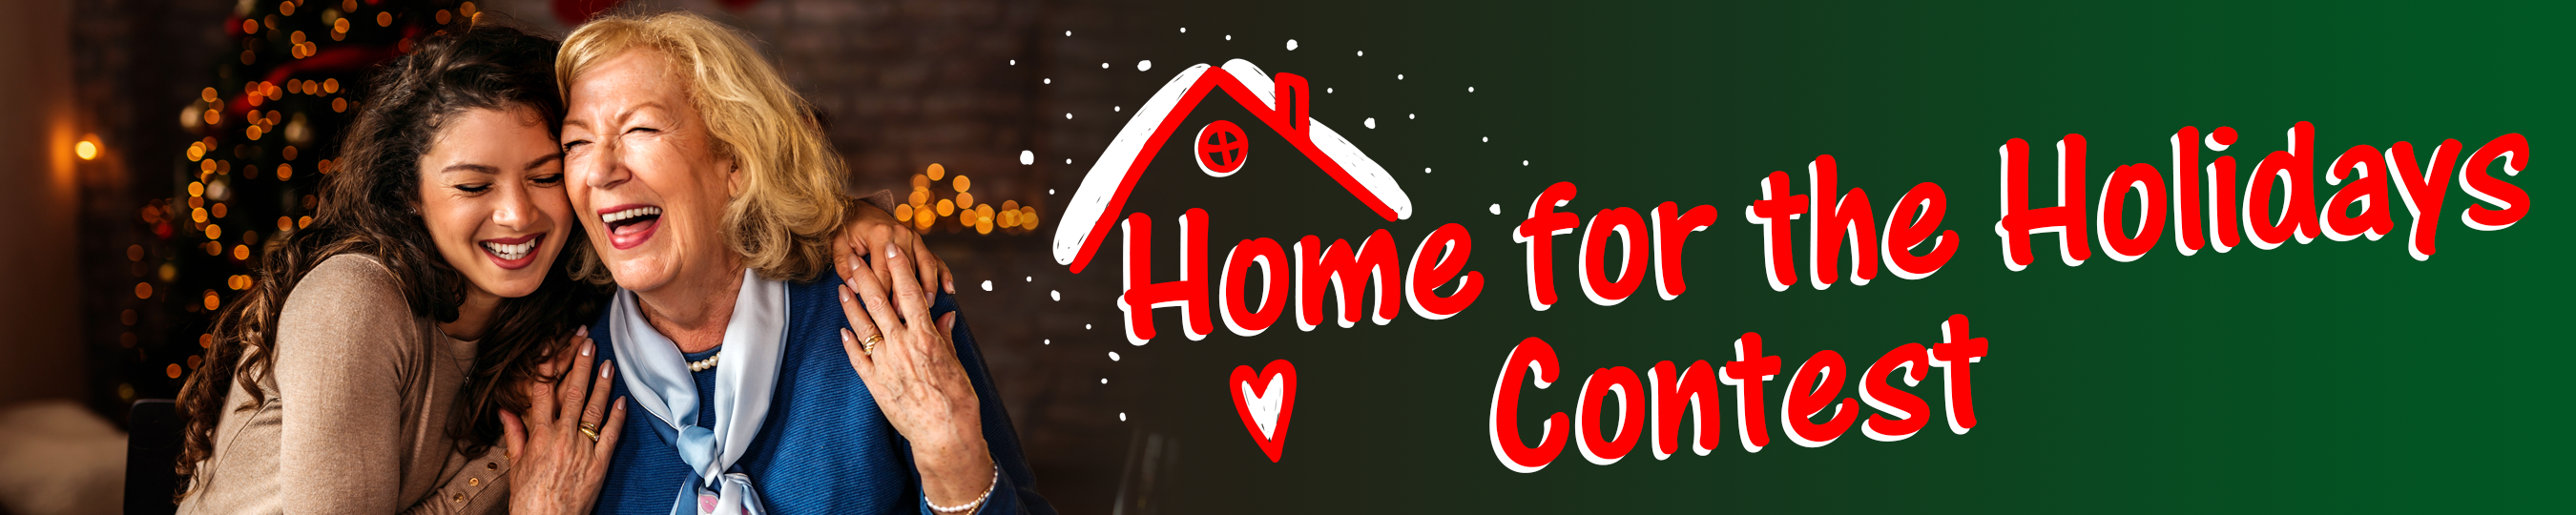 Home for the Holidays Contest